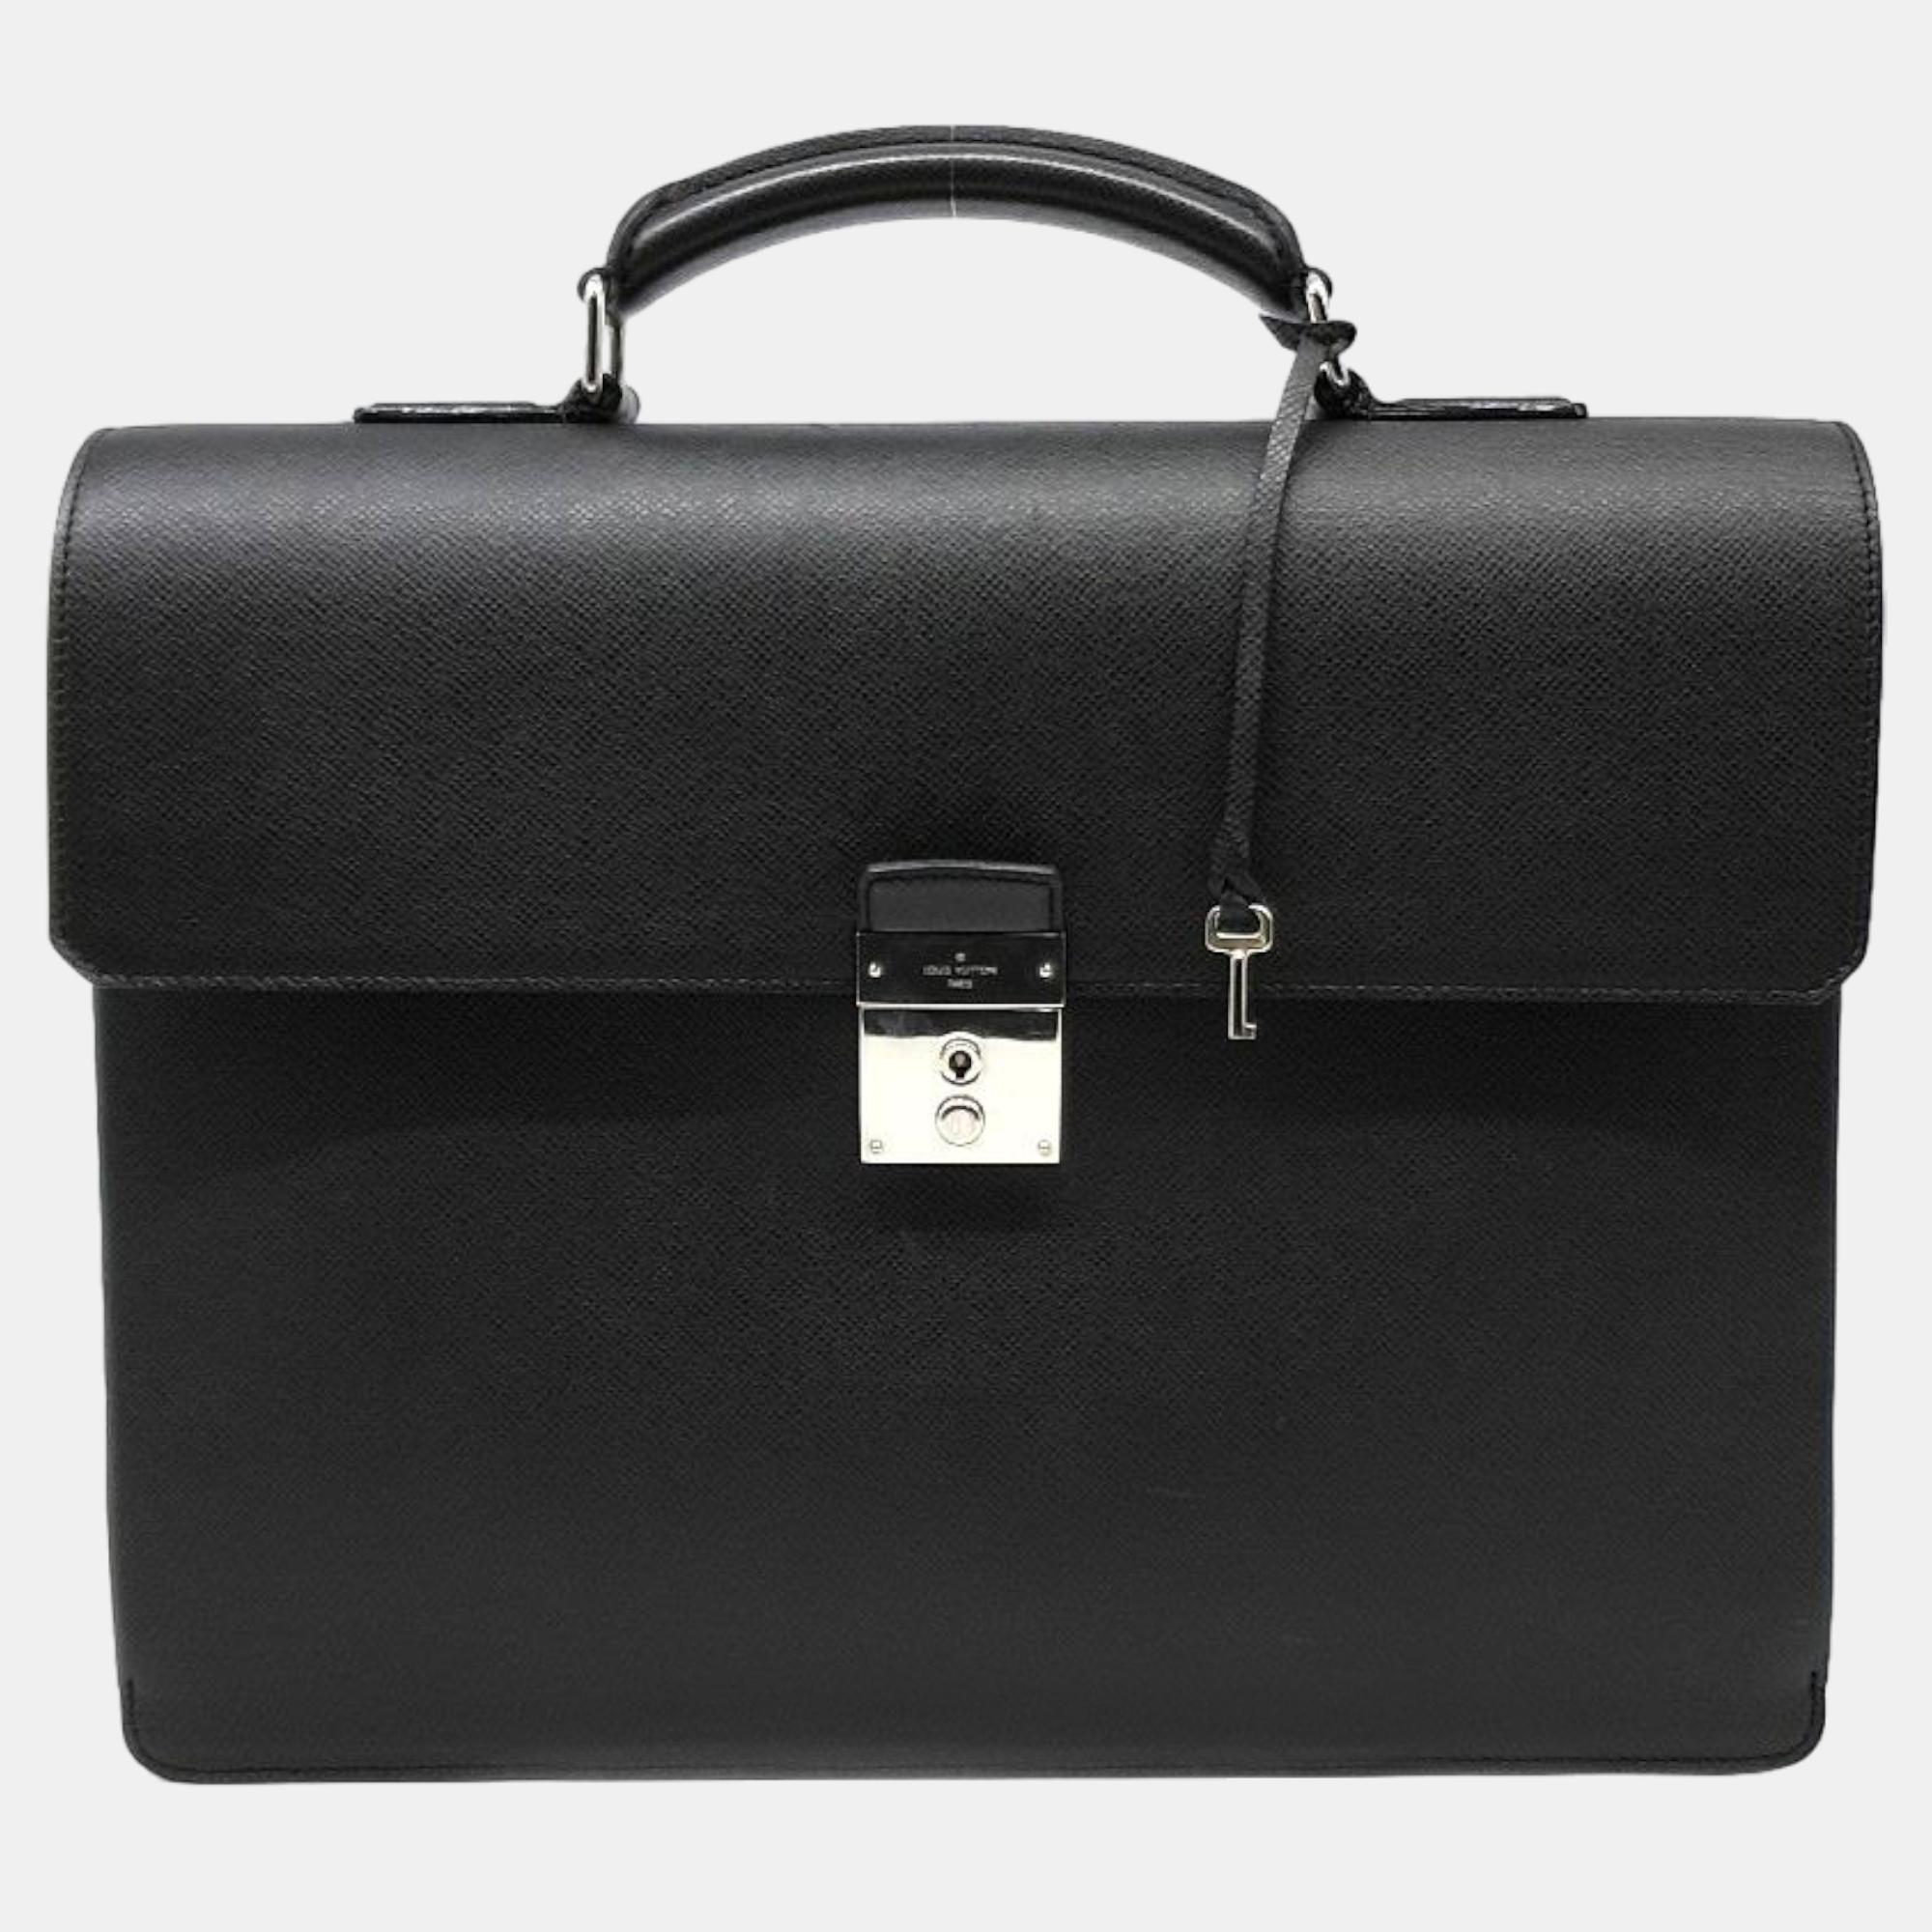 Louis vuitton black leather nomad neo robusto briefcase bag